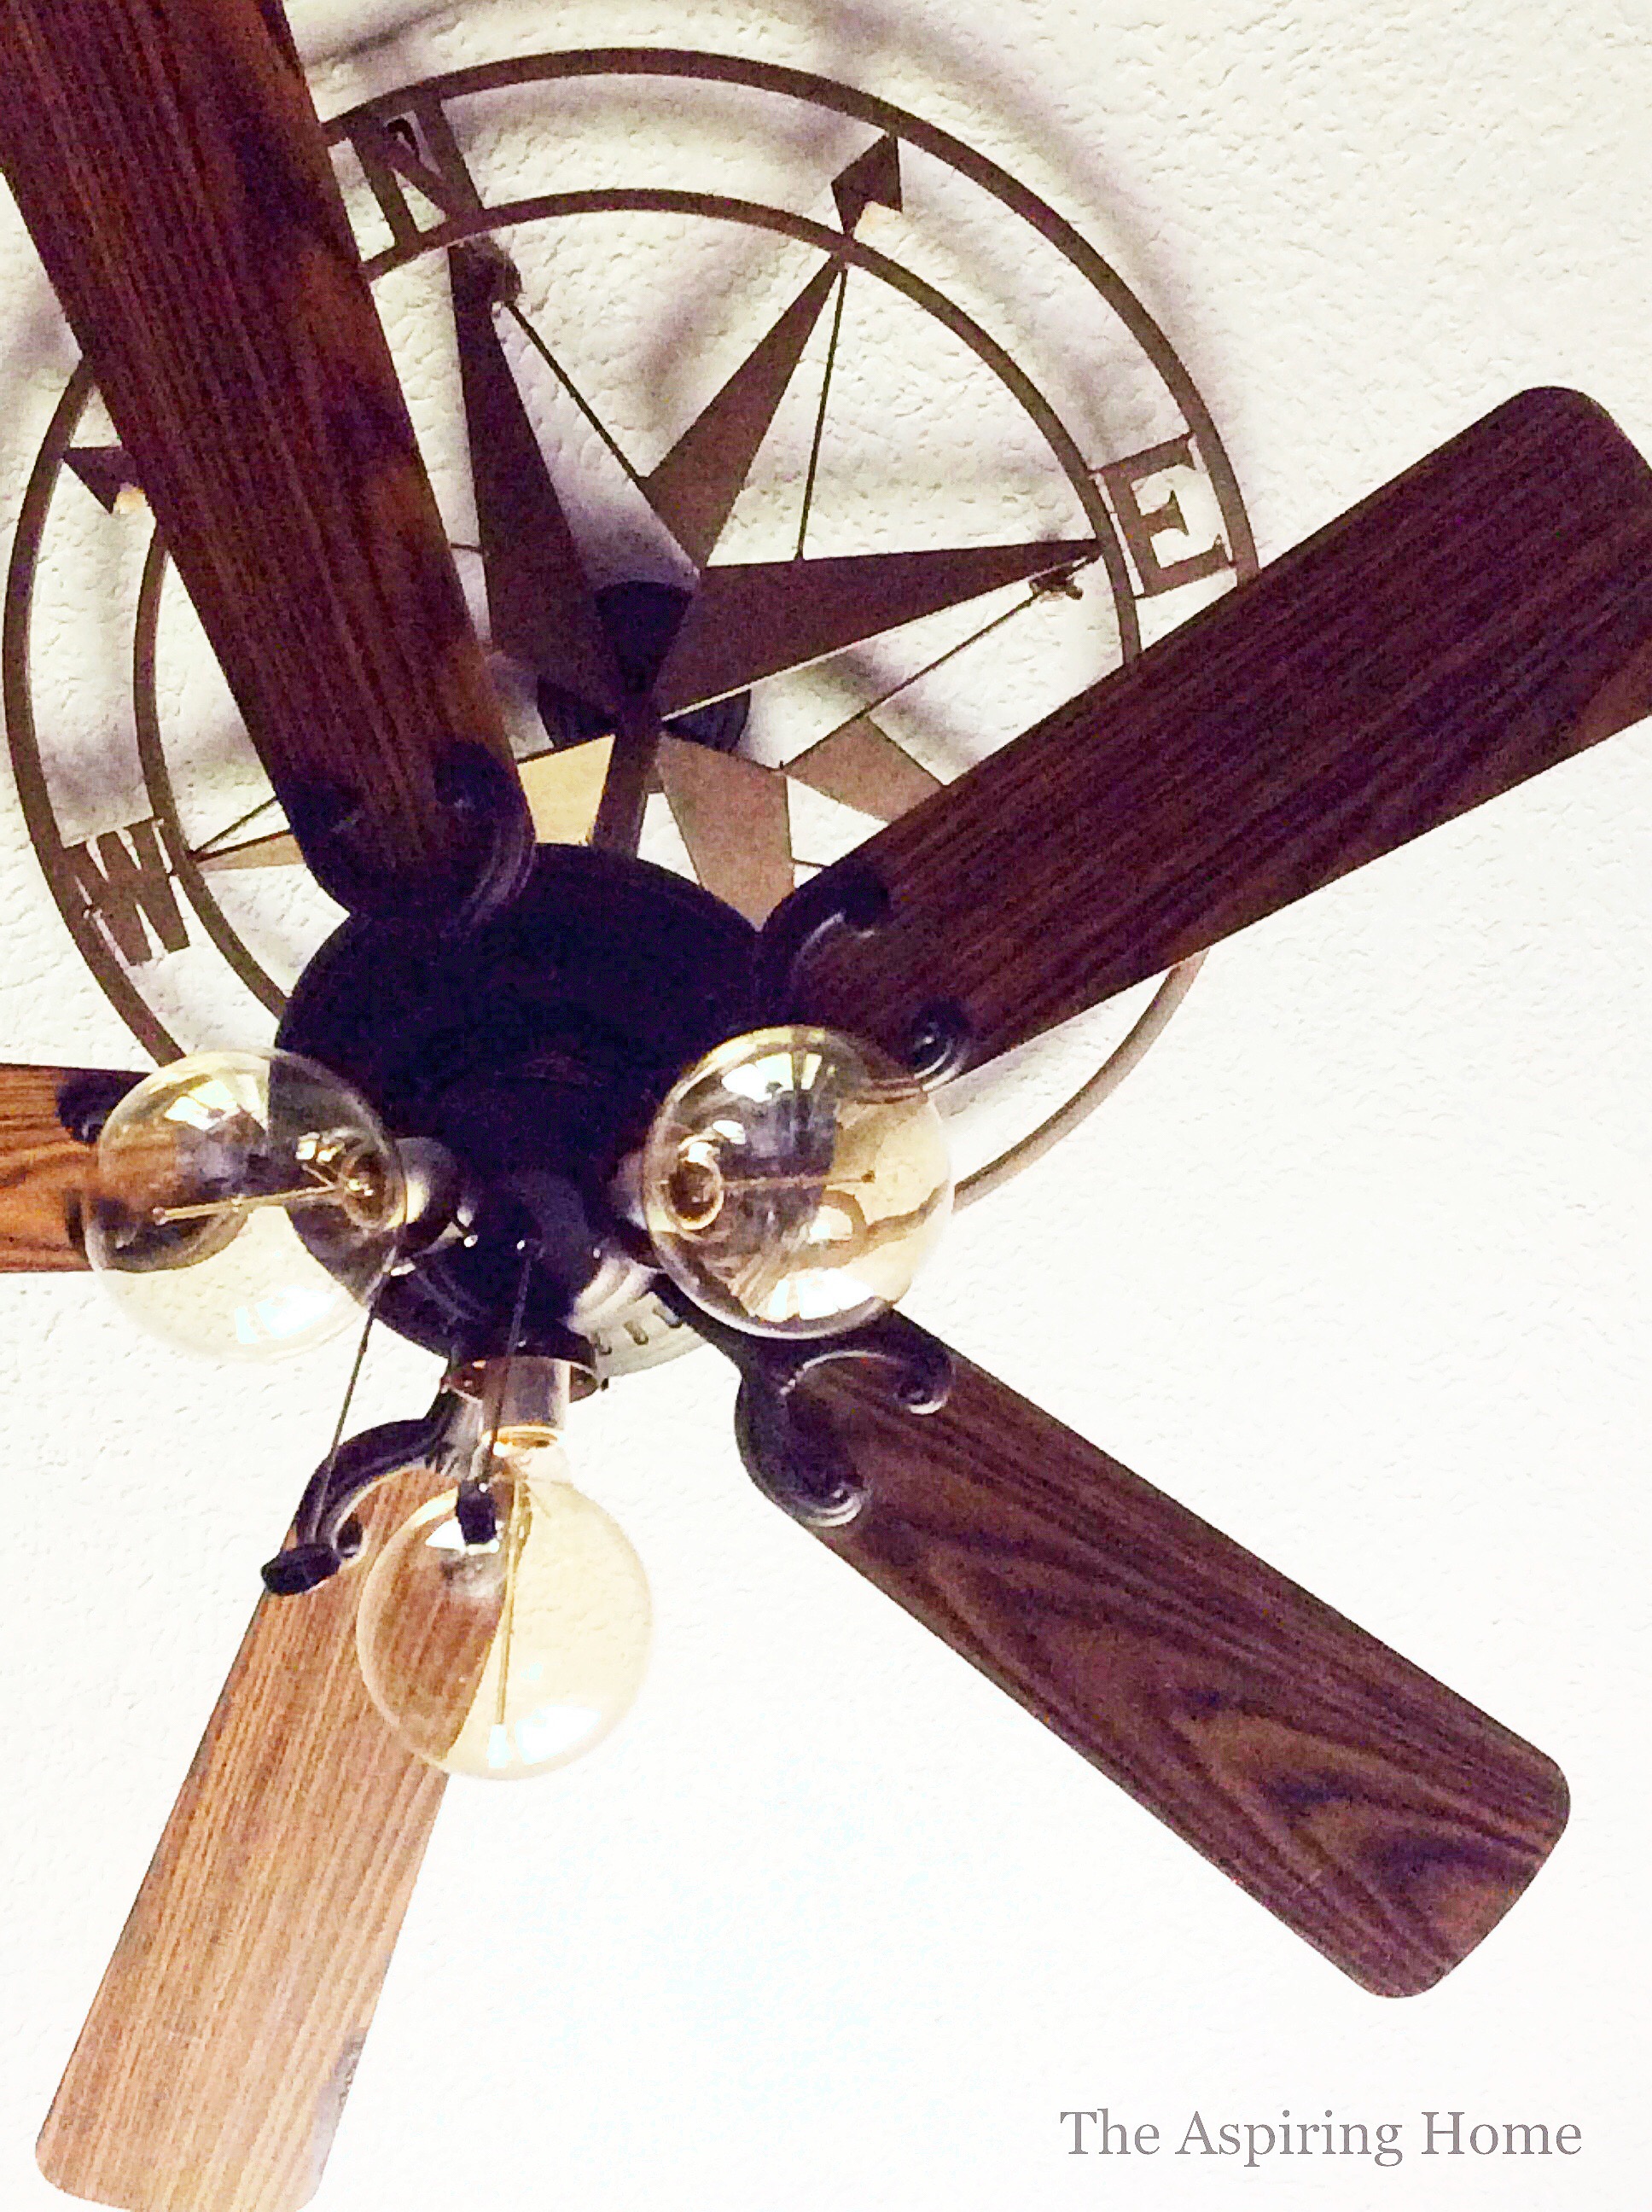 Aeron Decorative Ceiling Fan which has excellent features and  specifications, Try it at Summerking . - Get in touch with… | Instagram